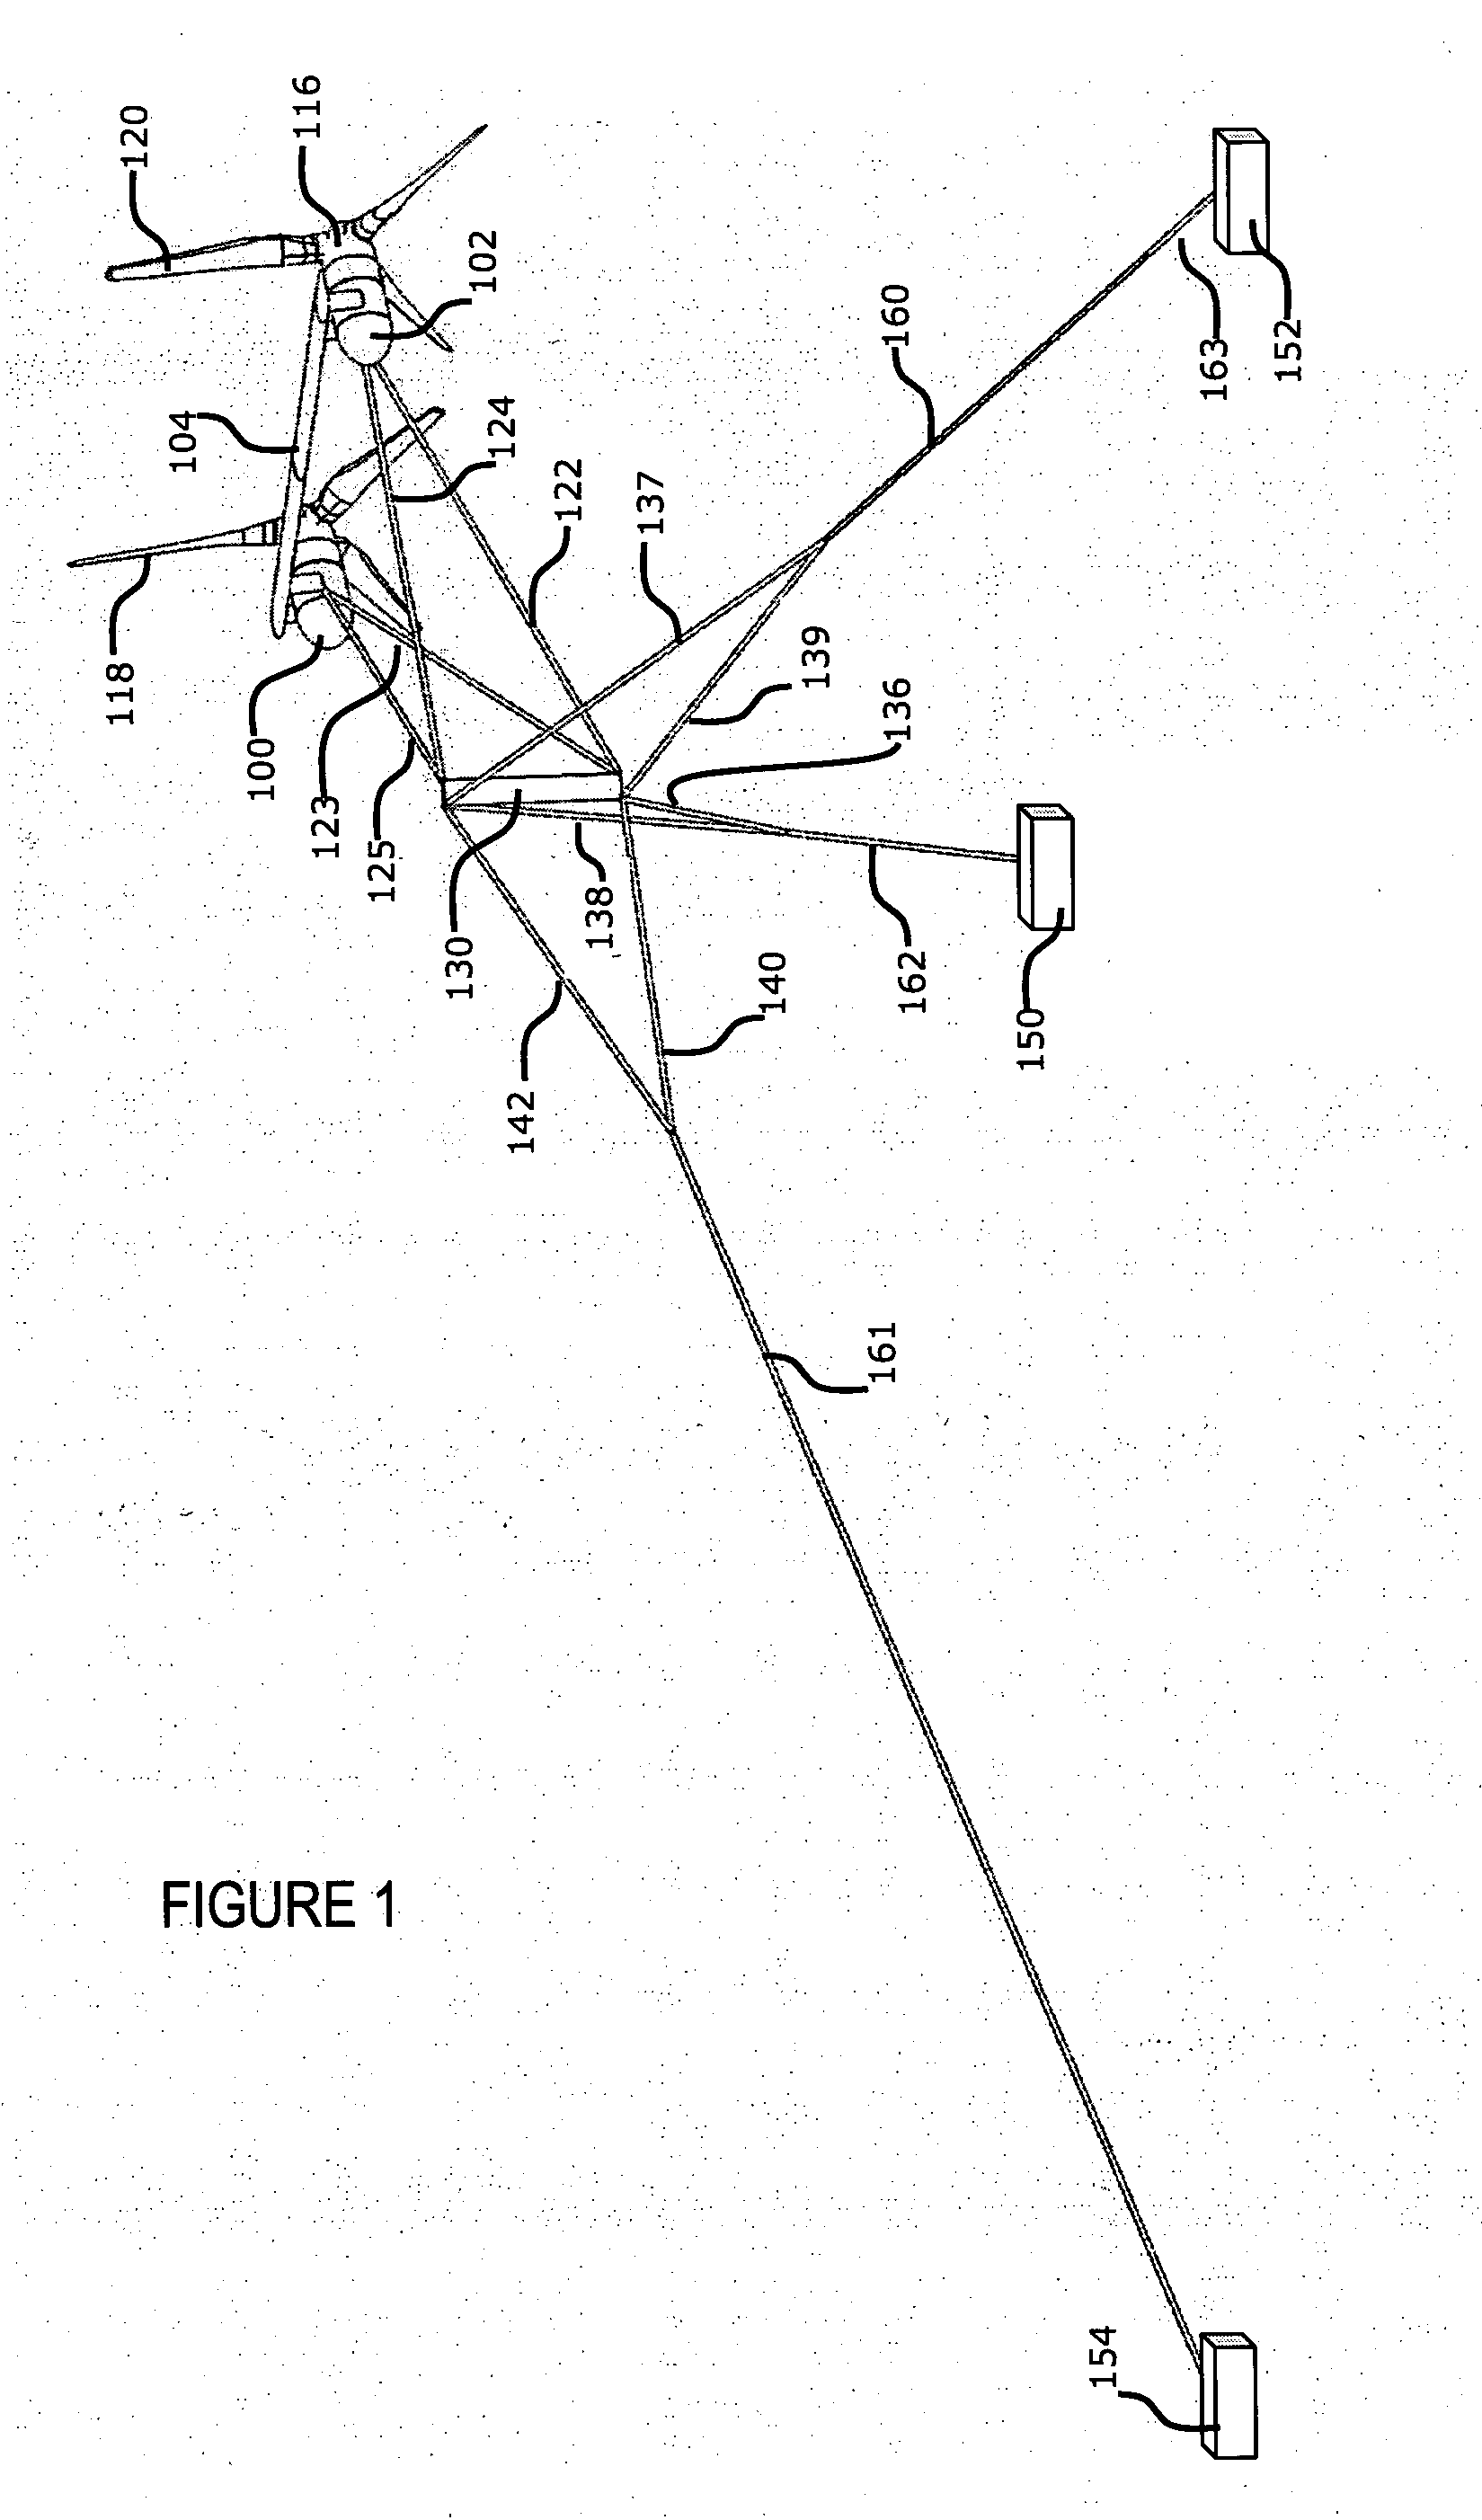 Multi-point tethering and stability system and control method for underwater current turbine